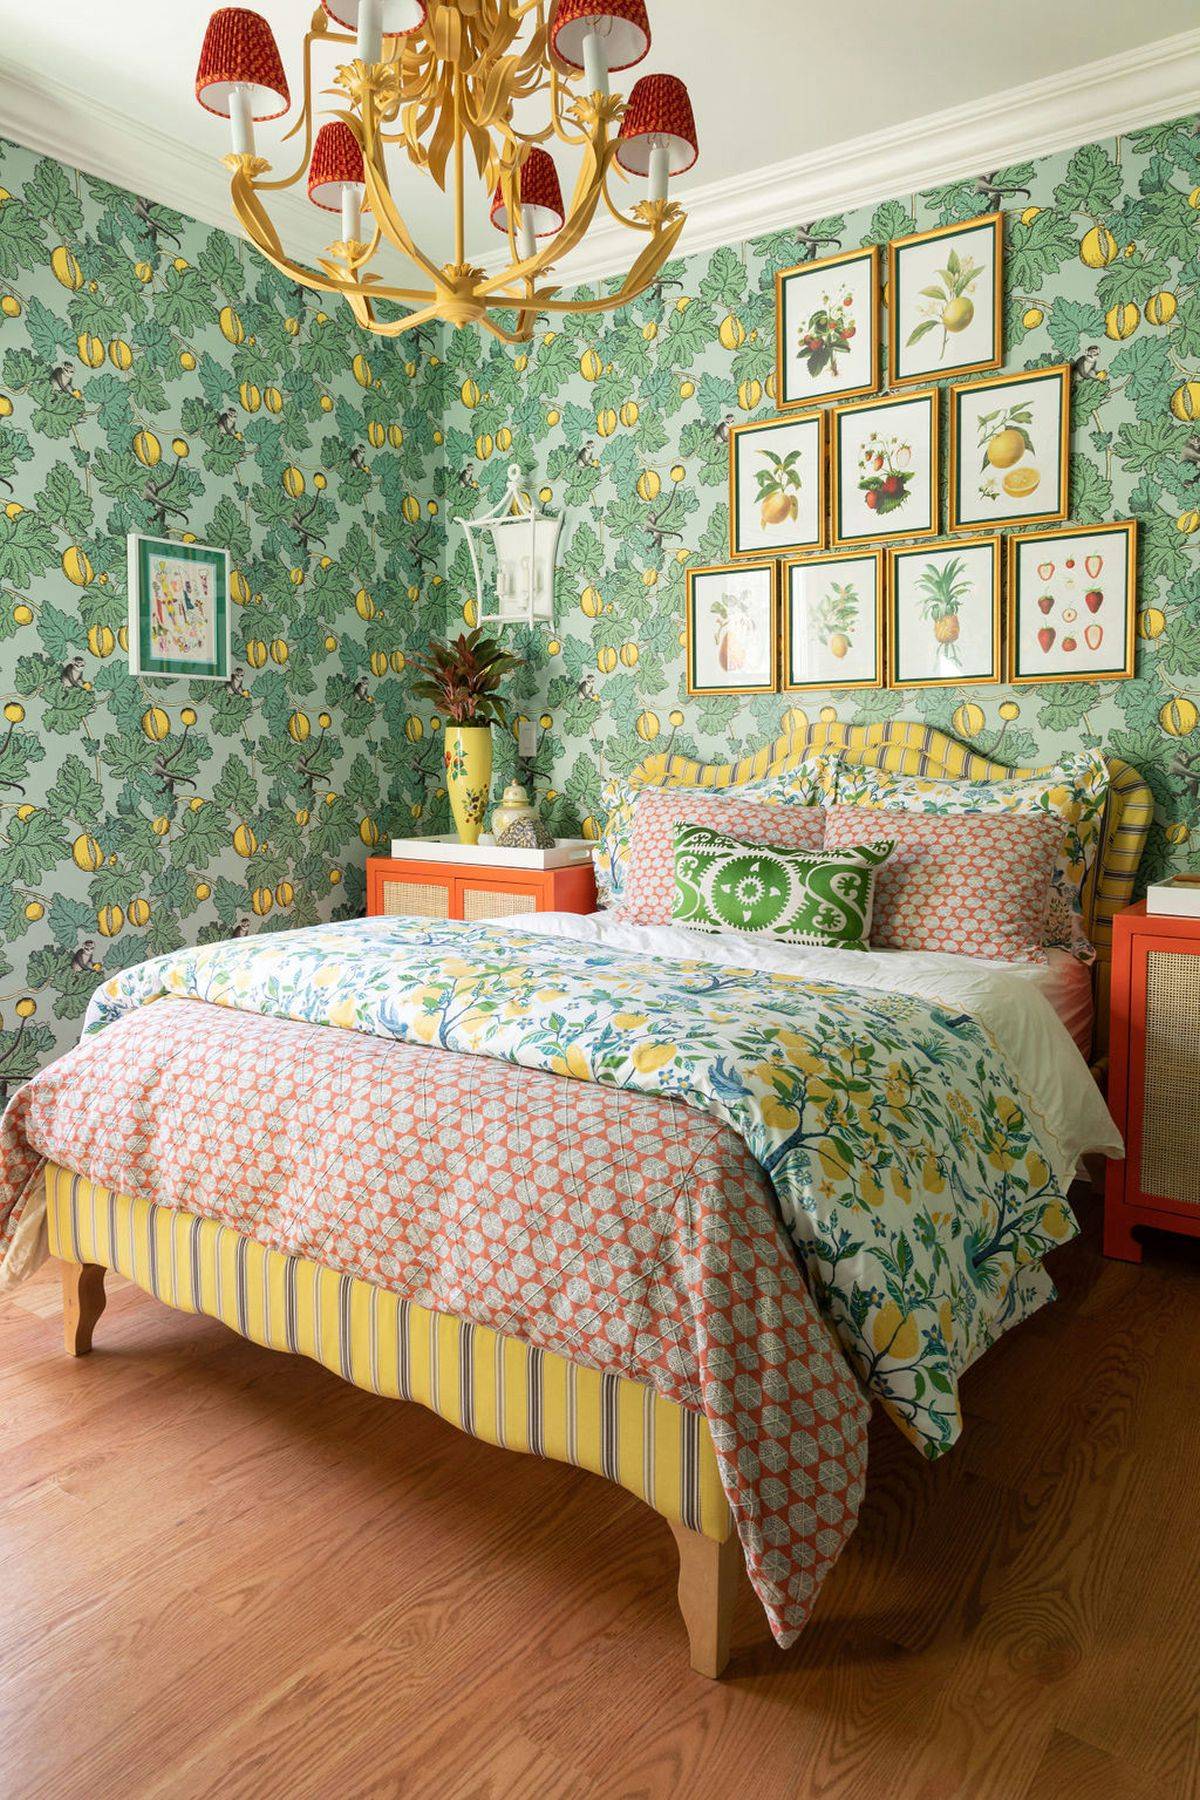 Vibrant leaf patterns are back in the bedroom this season - 15139